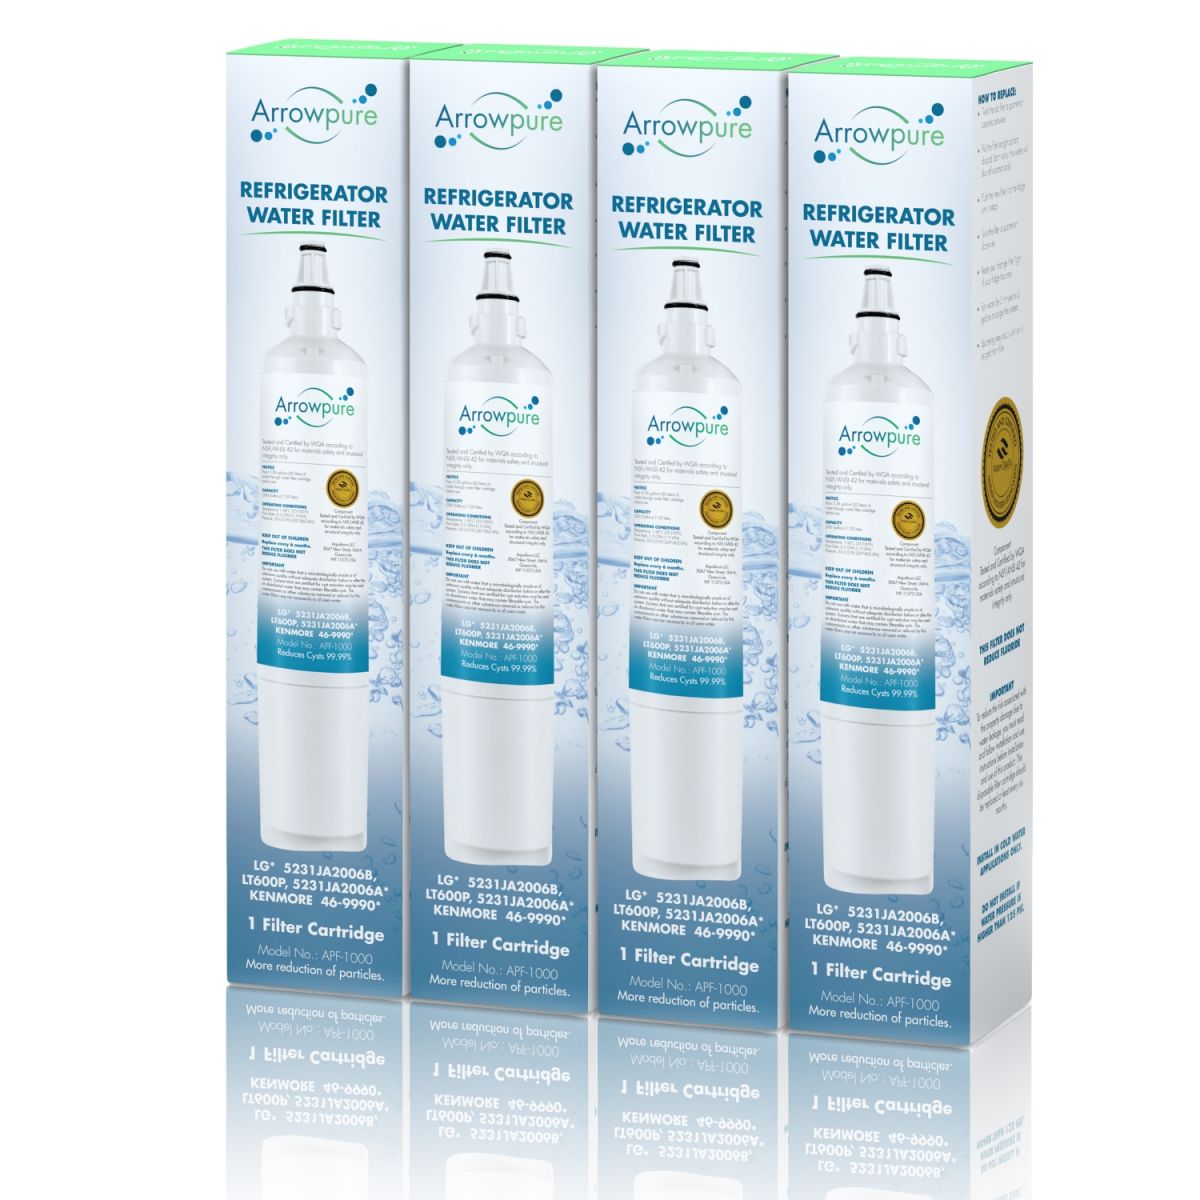 4 Pack Of Arrowpure Refrigerator Water Filter Replacement APF-1000x4